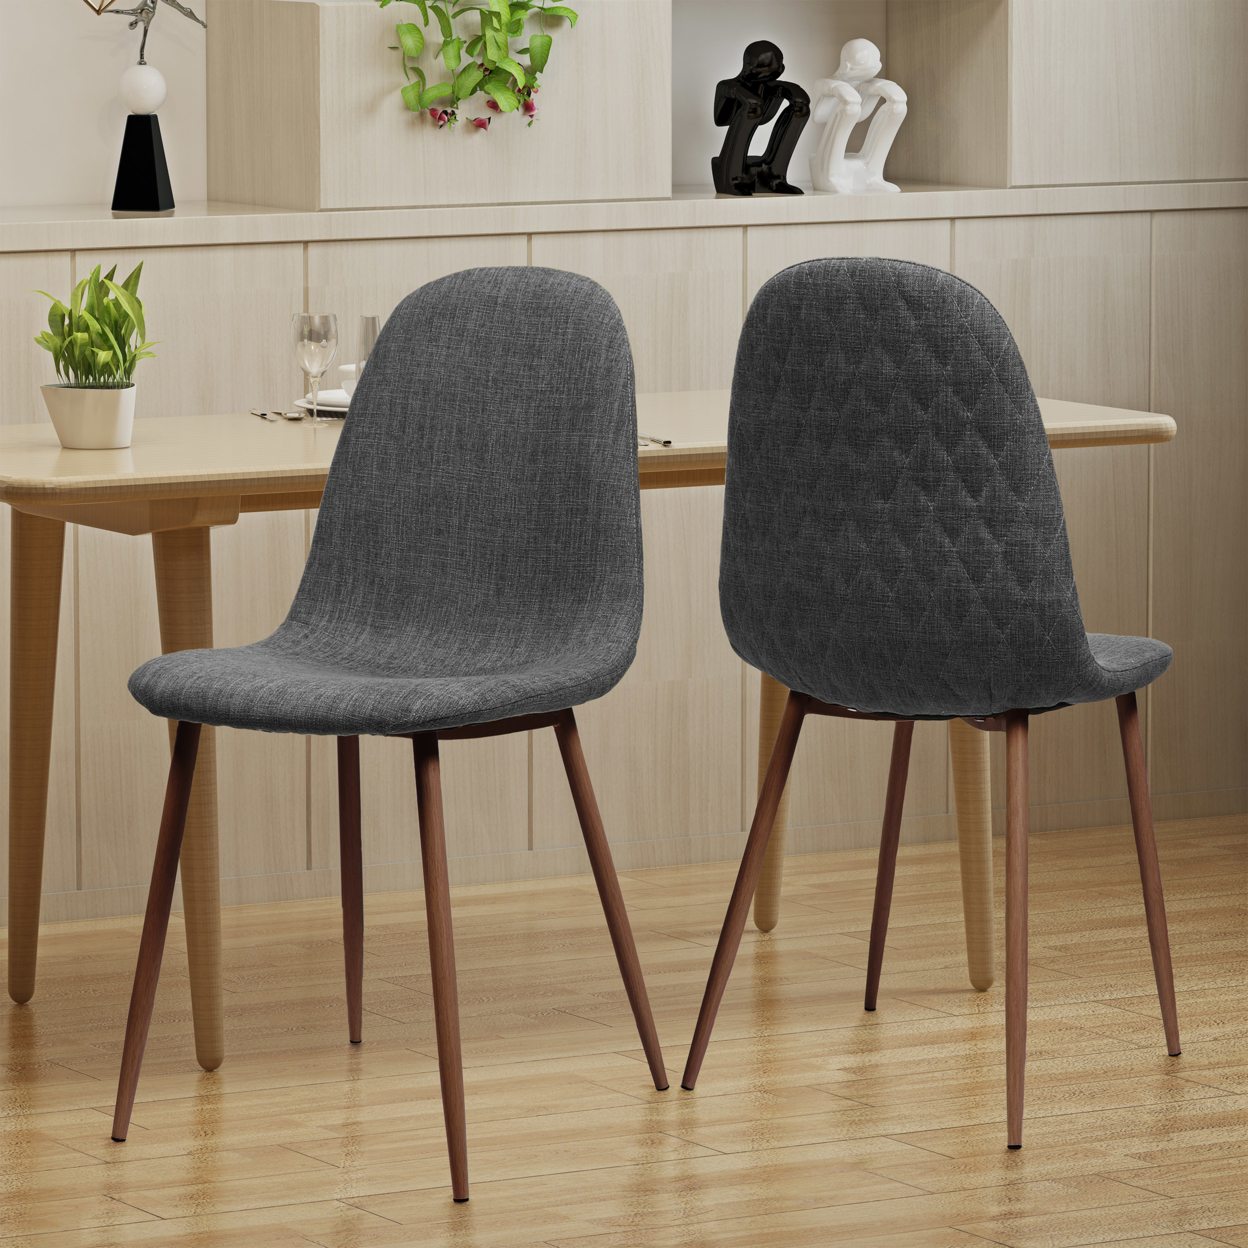 Camden Mid Century Fabric Dining Chairs With Wood Finished Legs - Set Of 2 - Muted Blue/Light Walnut